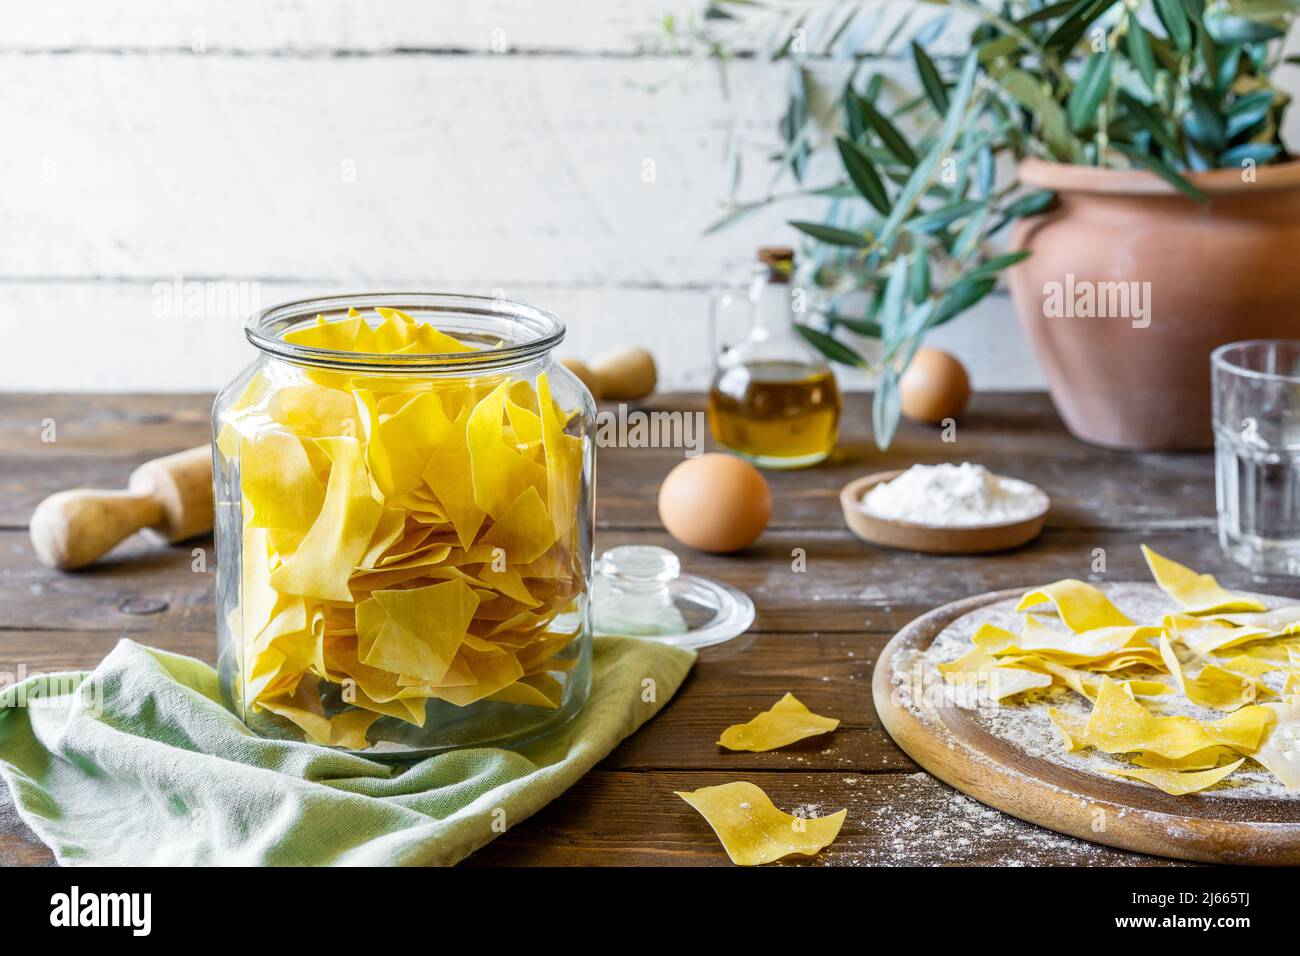 Homemade pasta Maltagliat in jar and wooden cutting boardi with ingredients in rustic style Stock Photo